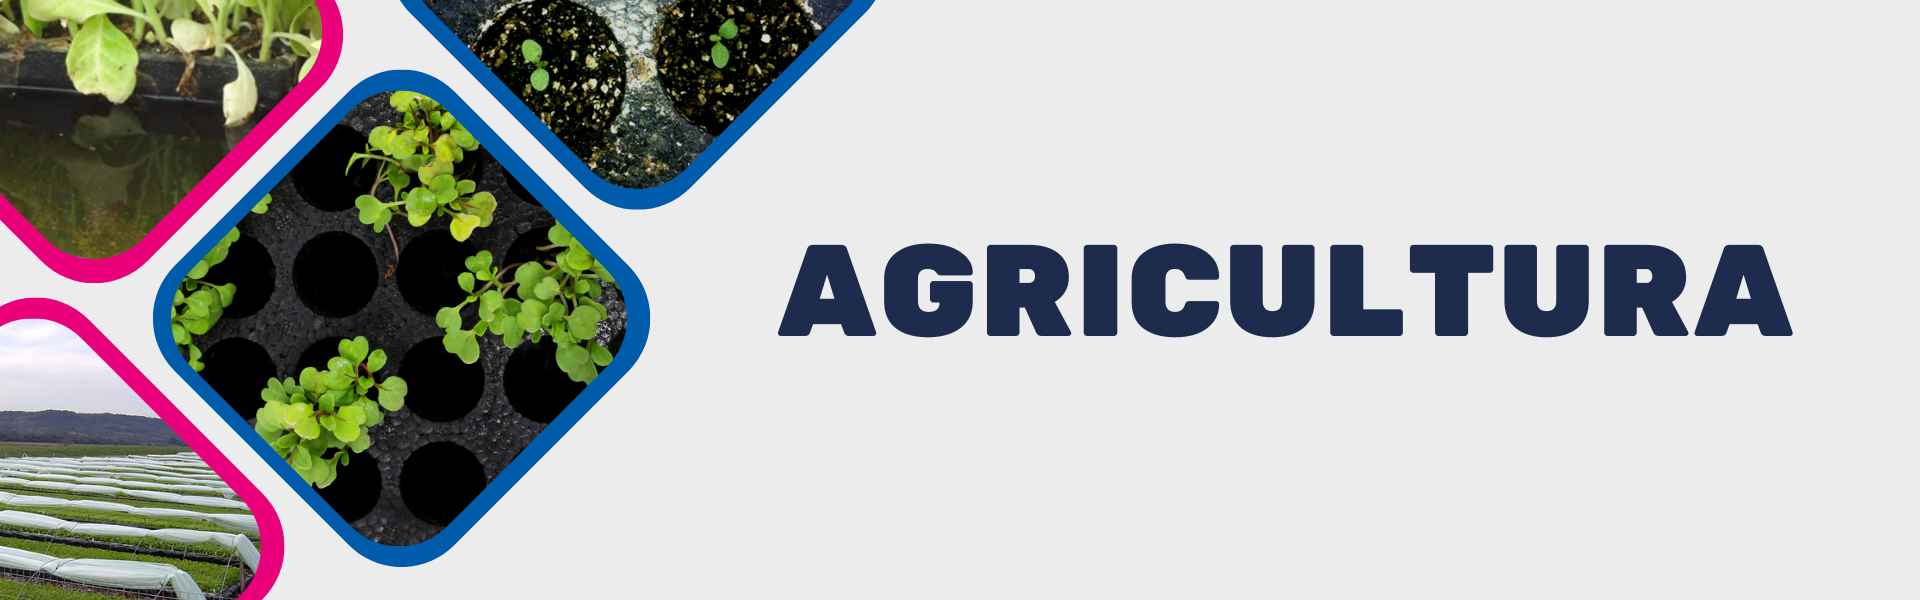 Banner - Agricultura